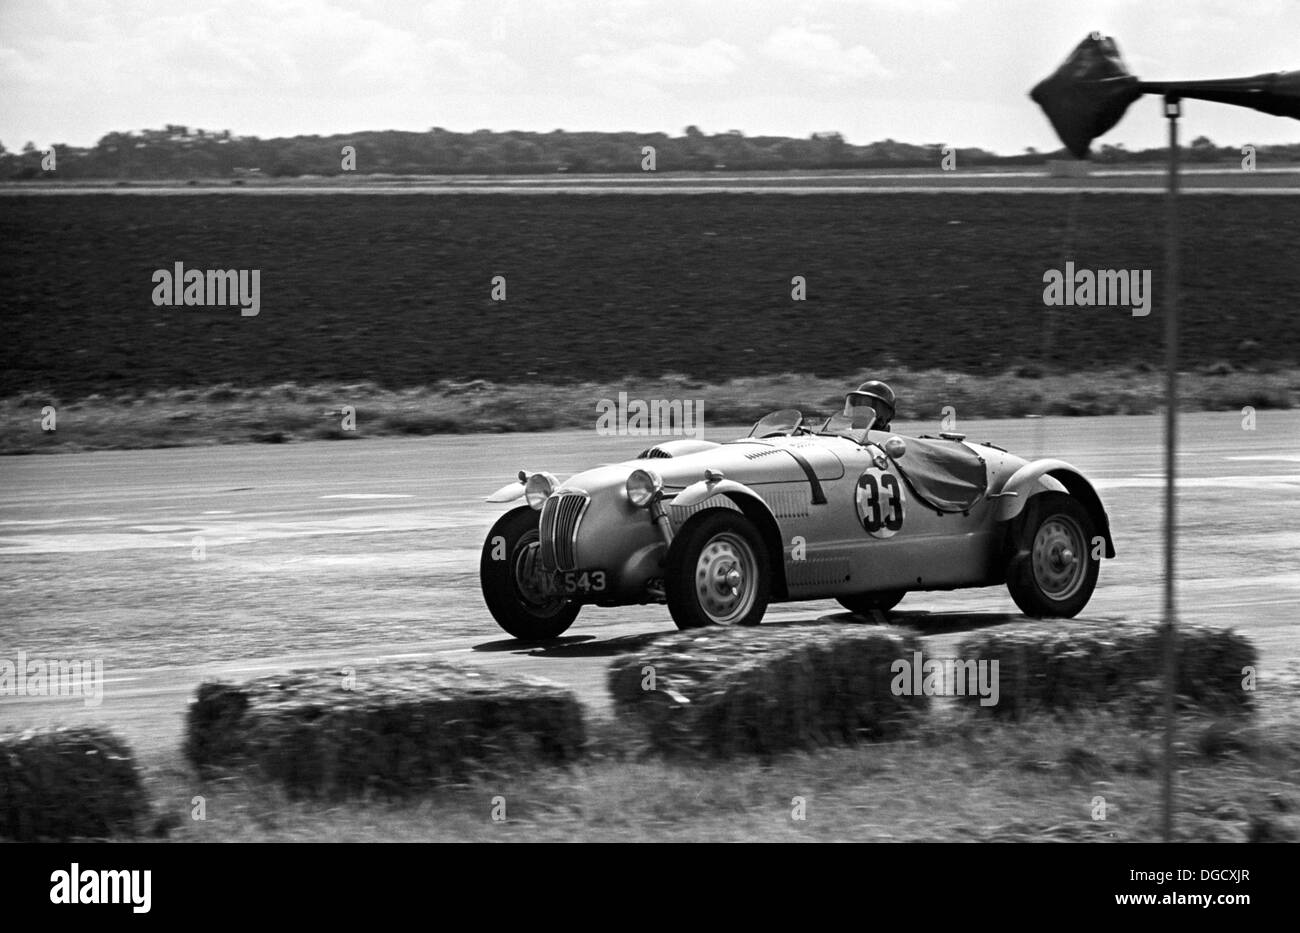 A Frazer Nash Le Mans Replica racing in the International Trophy at Silverstone, England 1950. Stock Photo